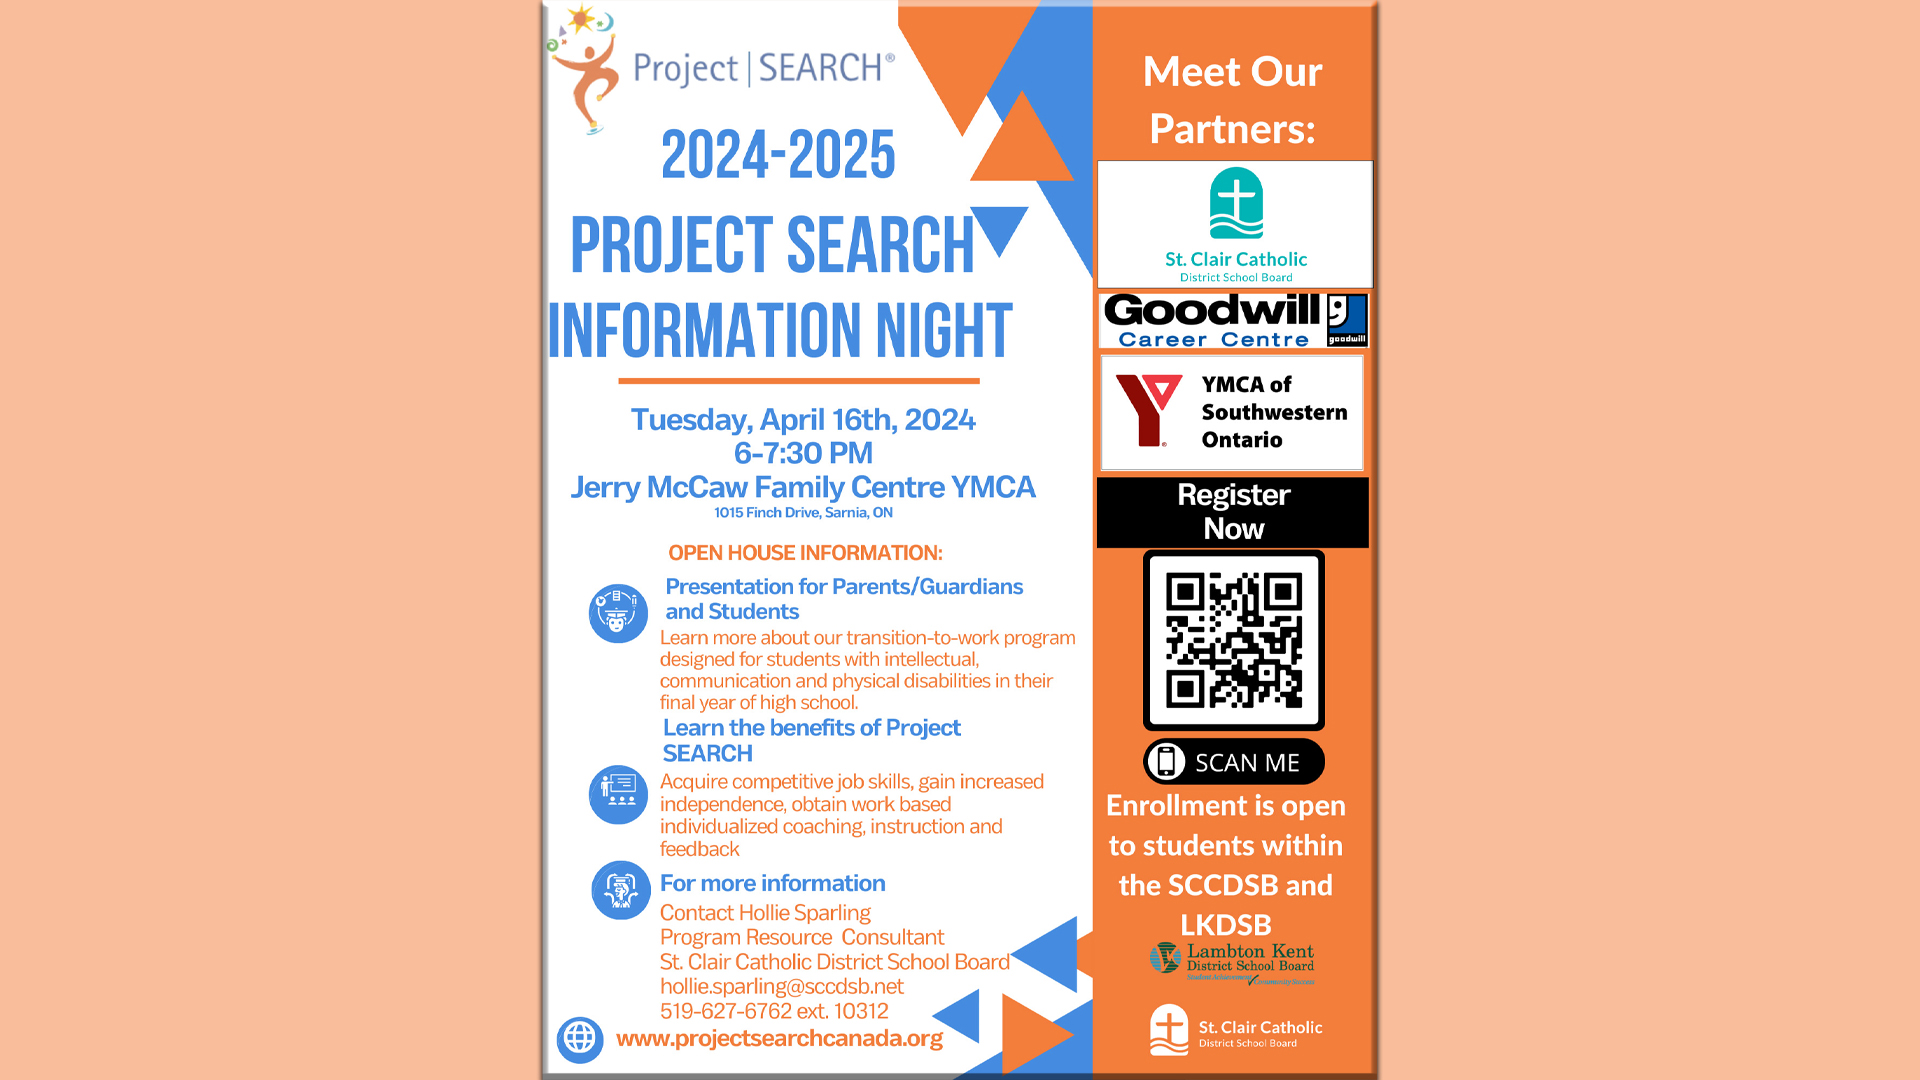 ‘Project Search’ Transition-to-Work Program Open House Planned